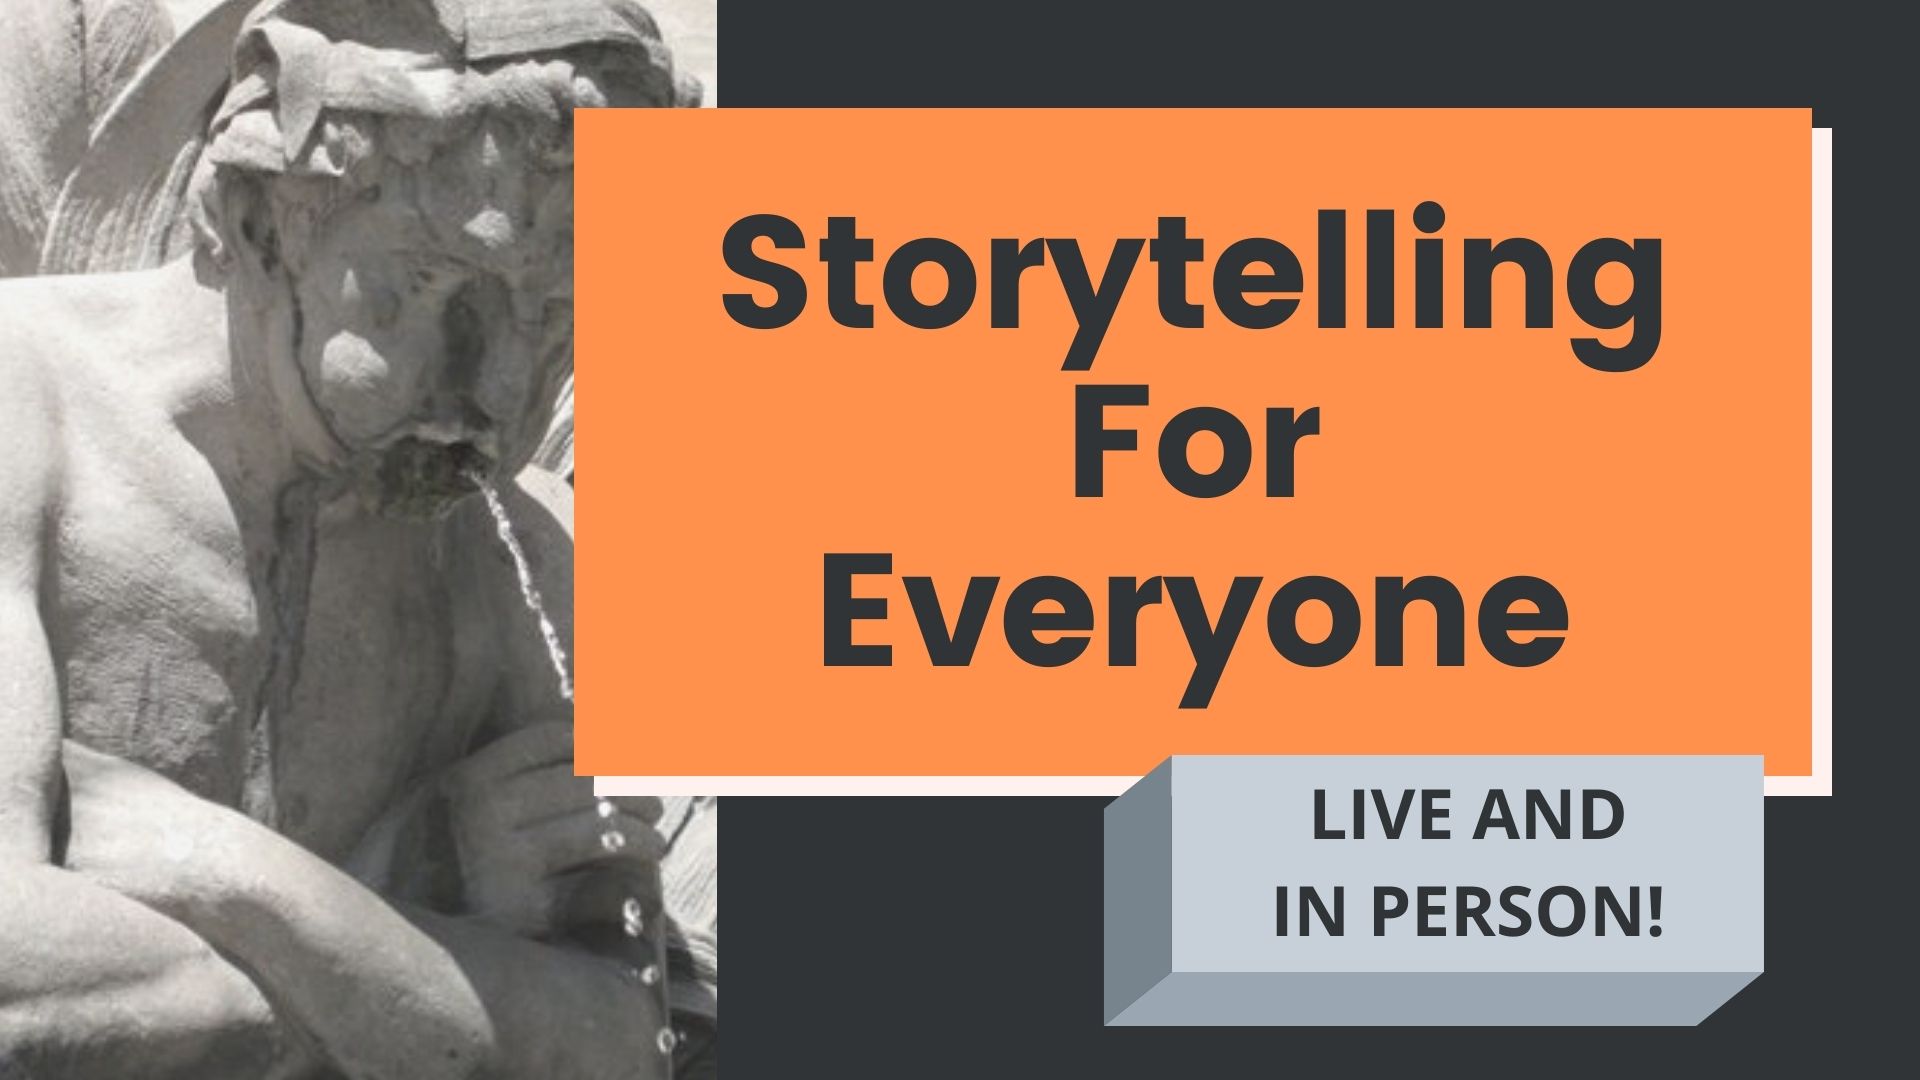 Storytelling For Everyone: Four Week Course in Personal Narrative (Mondays in July)